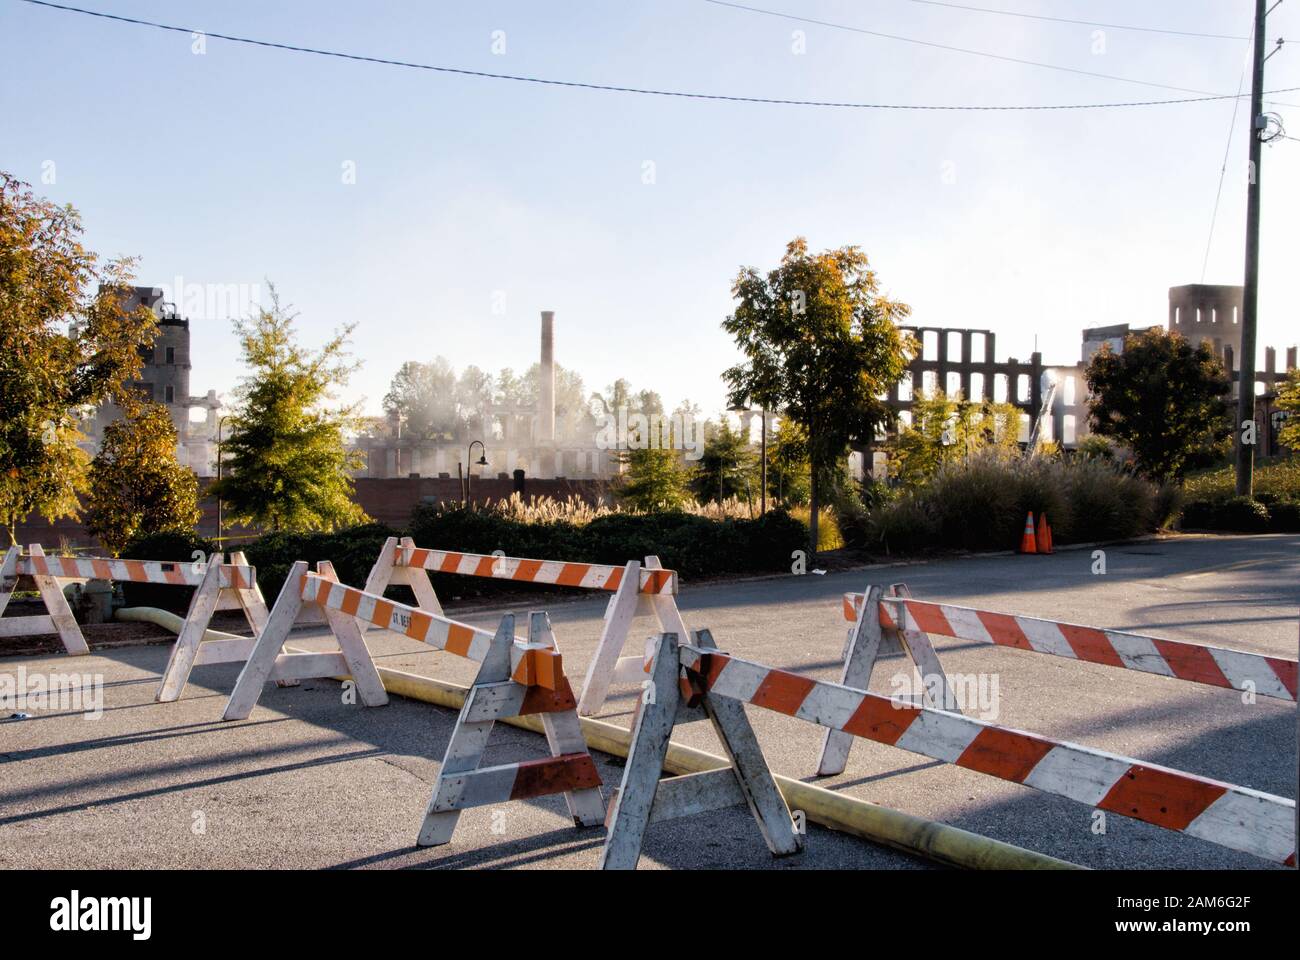 Wooden street barricades are set up to prevent traffic from going to the burning and smoke filled industrial building in the background. Stock Photo